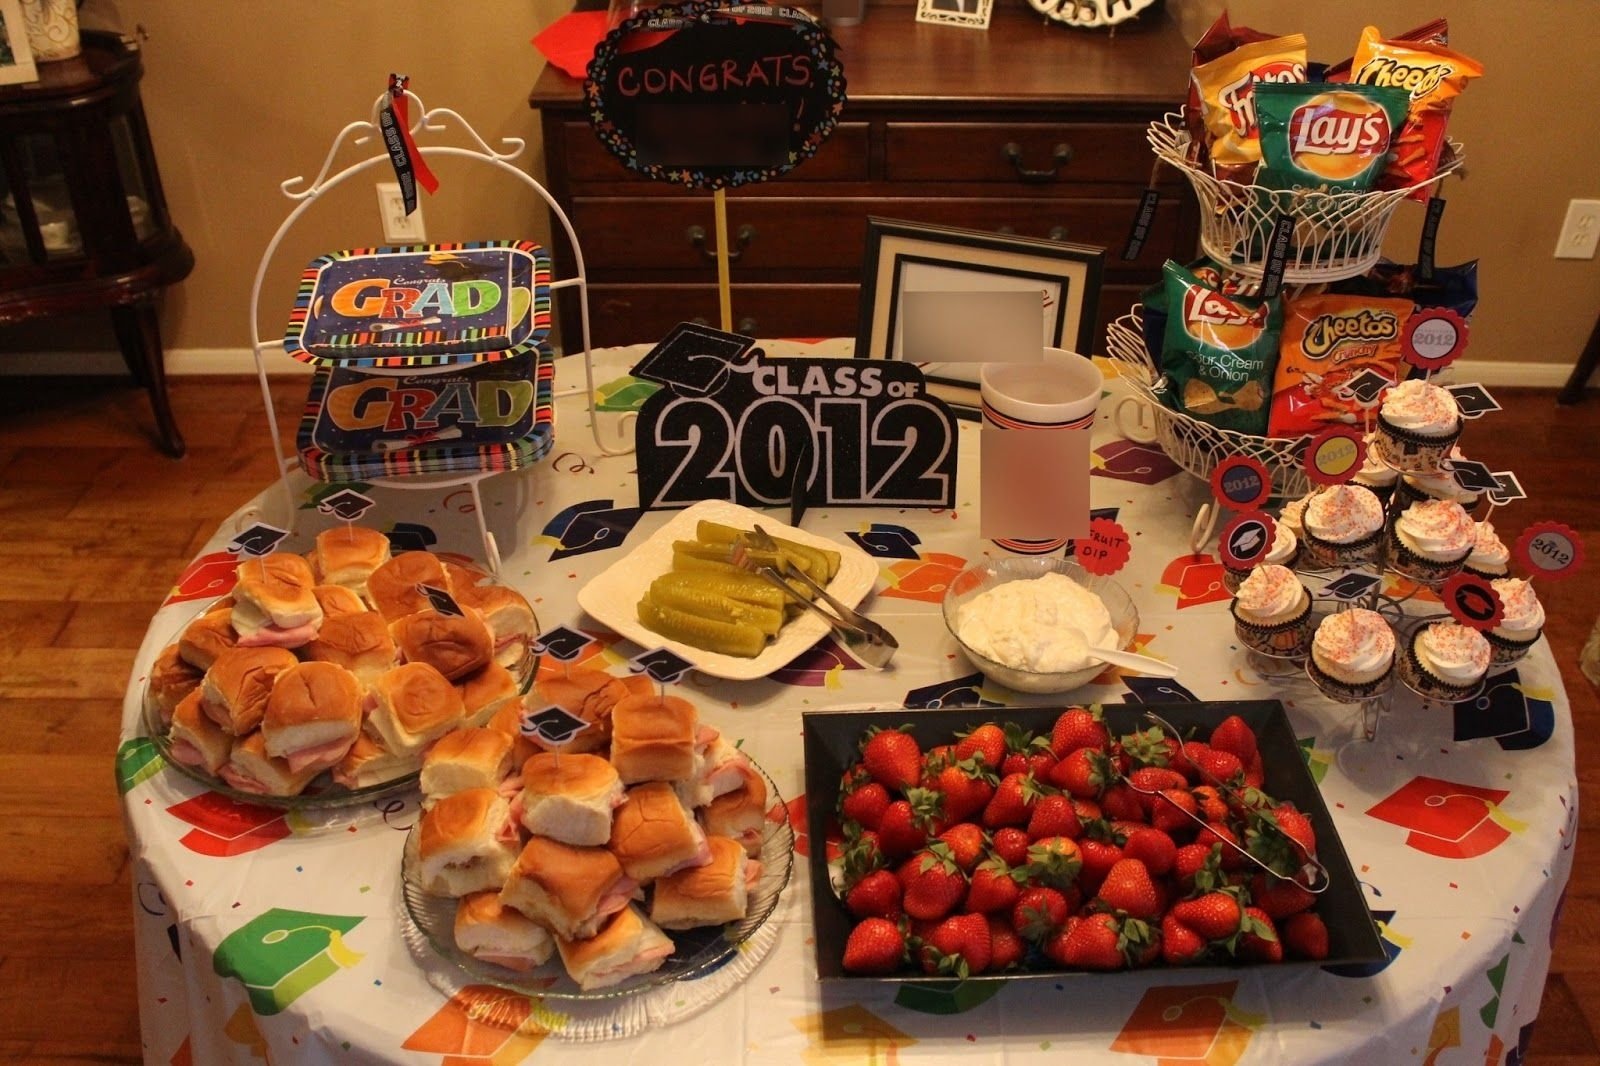 10 Spectacular Food Ideas For Graduation Open House graduation decoration ideas this is just a simple banner i 6 2022